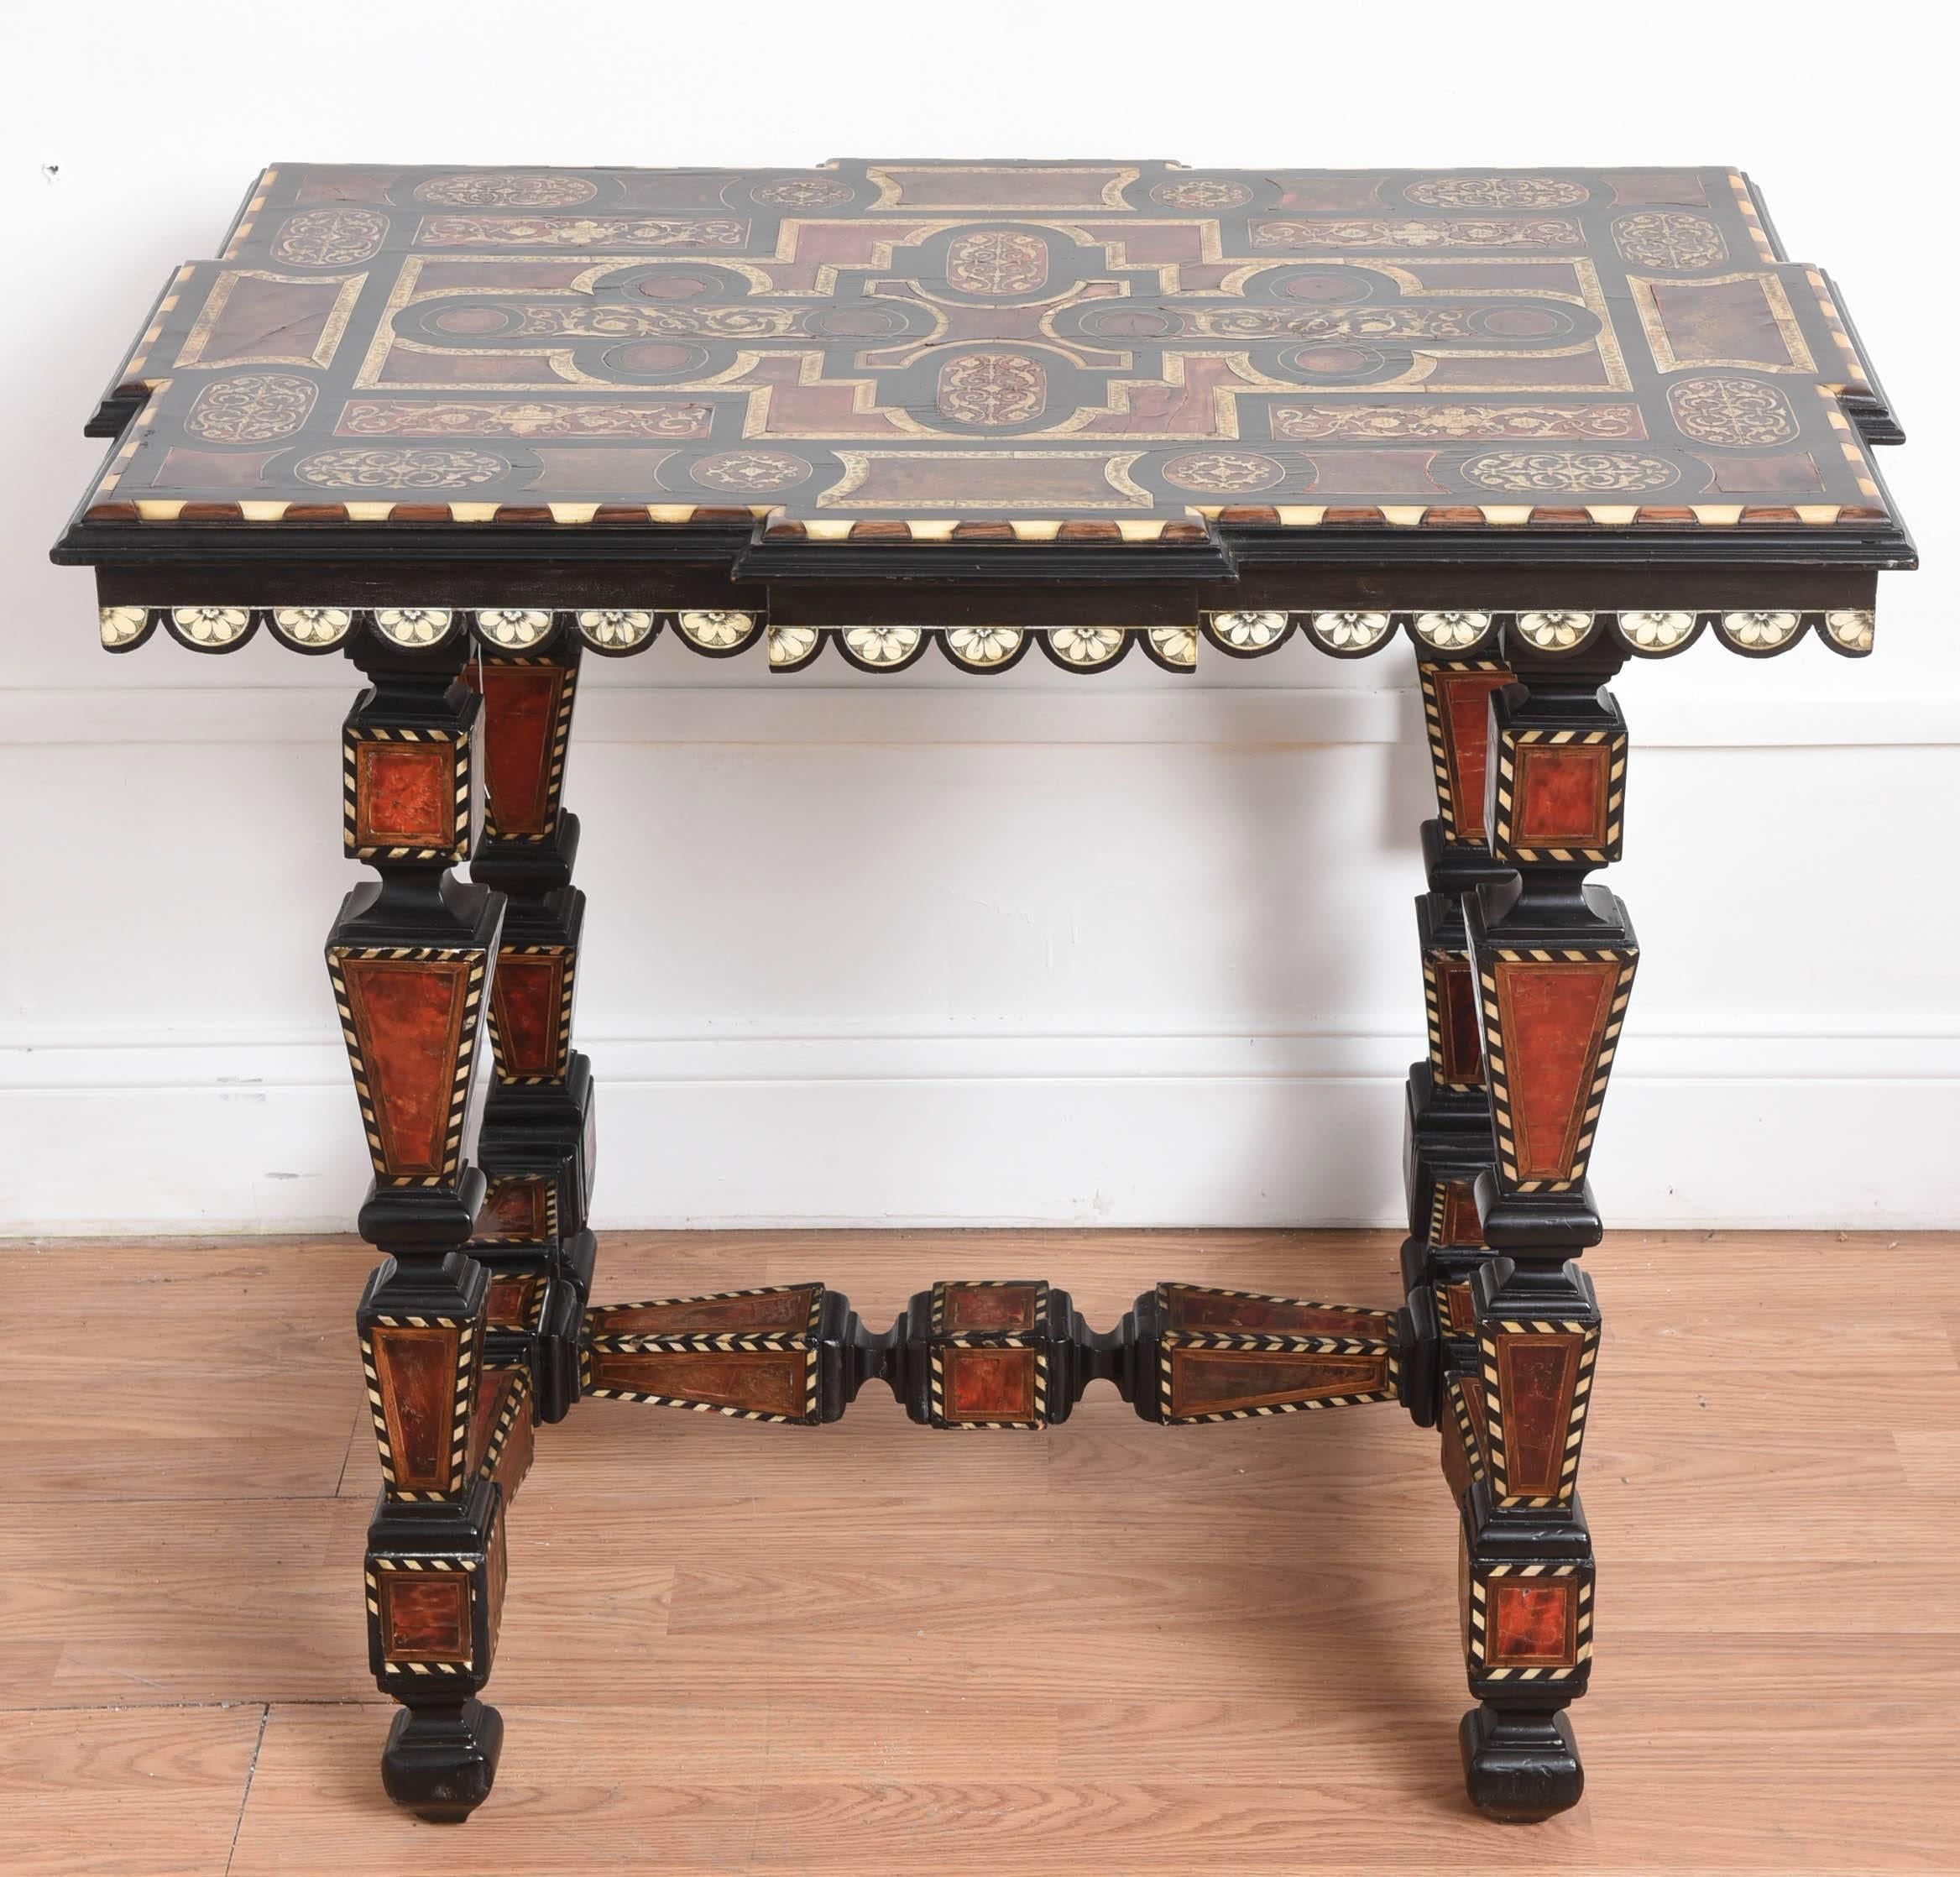 Beautiful late 19th century Italian side table, inlaid with tortoise, ivory and ebony. In great condition.